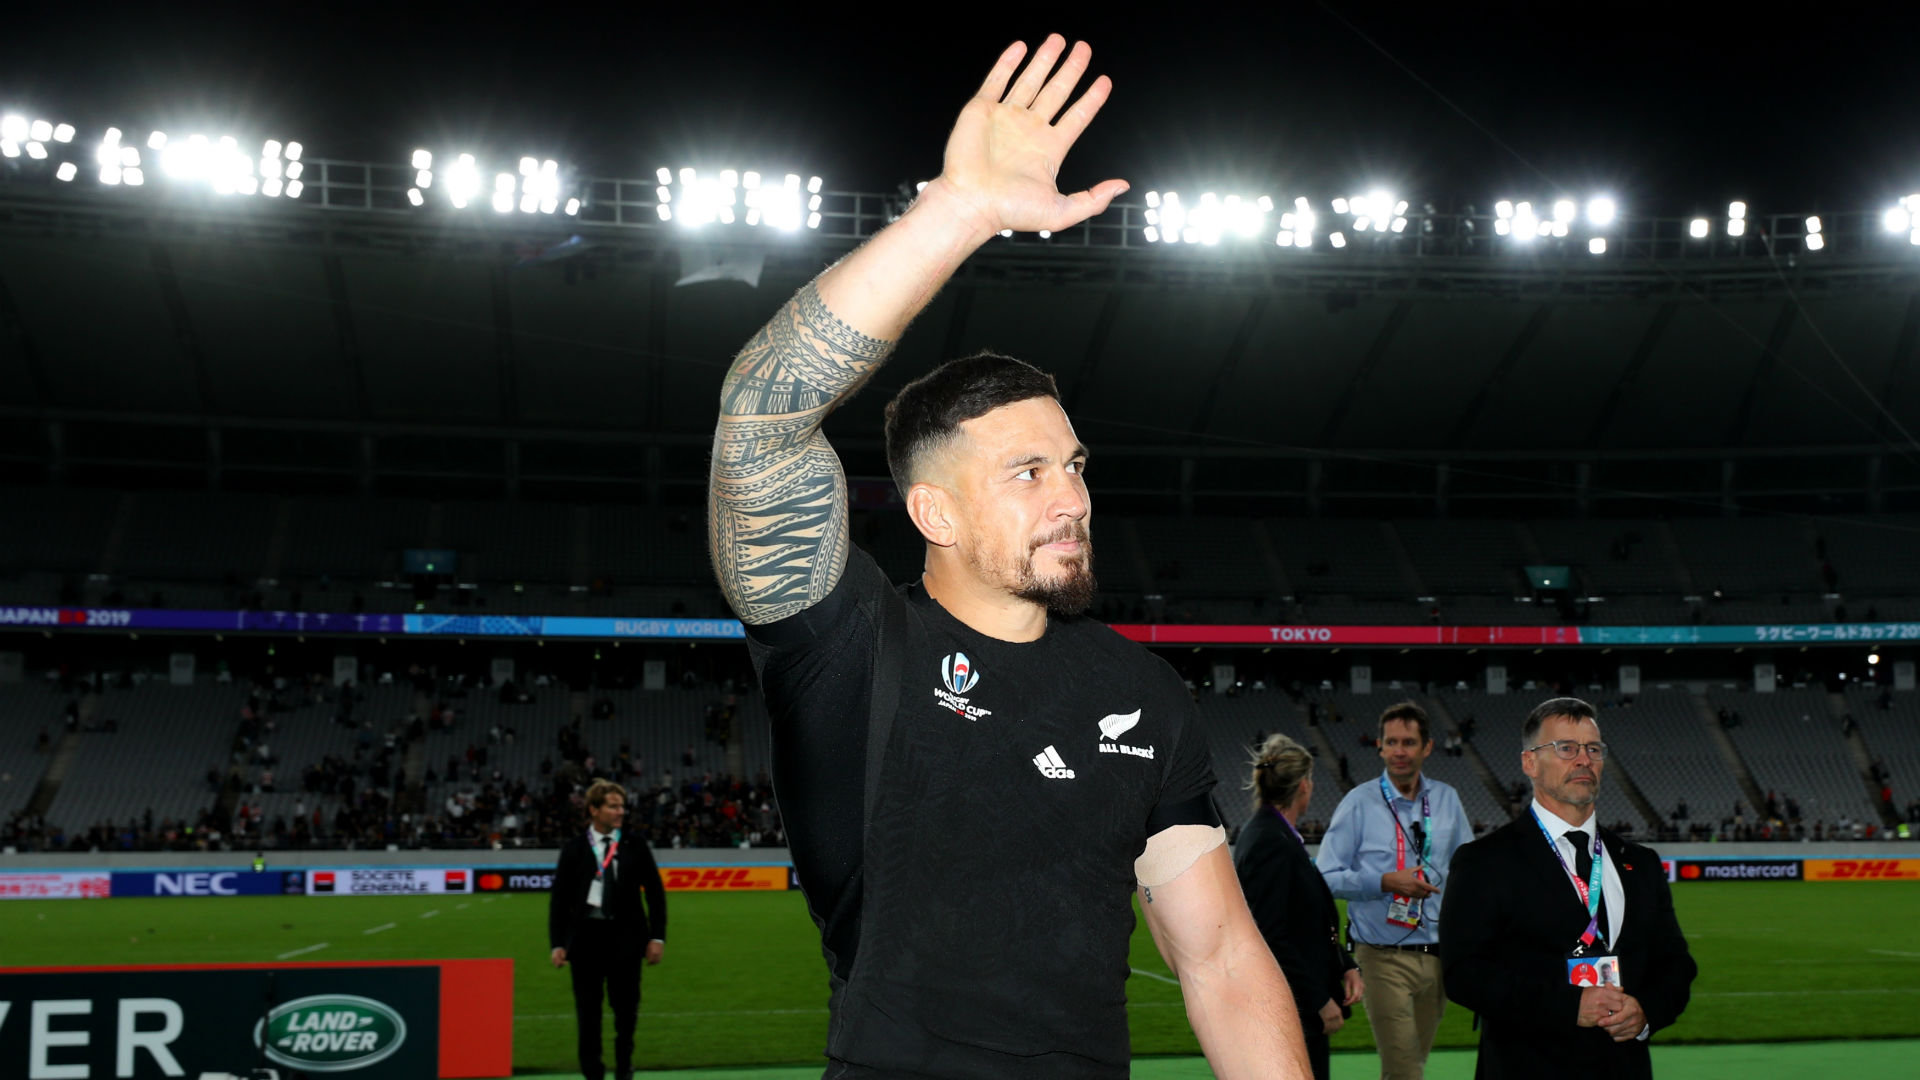 Sonny Bill Williams appears primed to make a mega-money move to Toronto Wolfpack, whose director of rugby wants the switch to set a trend.